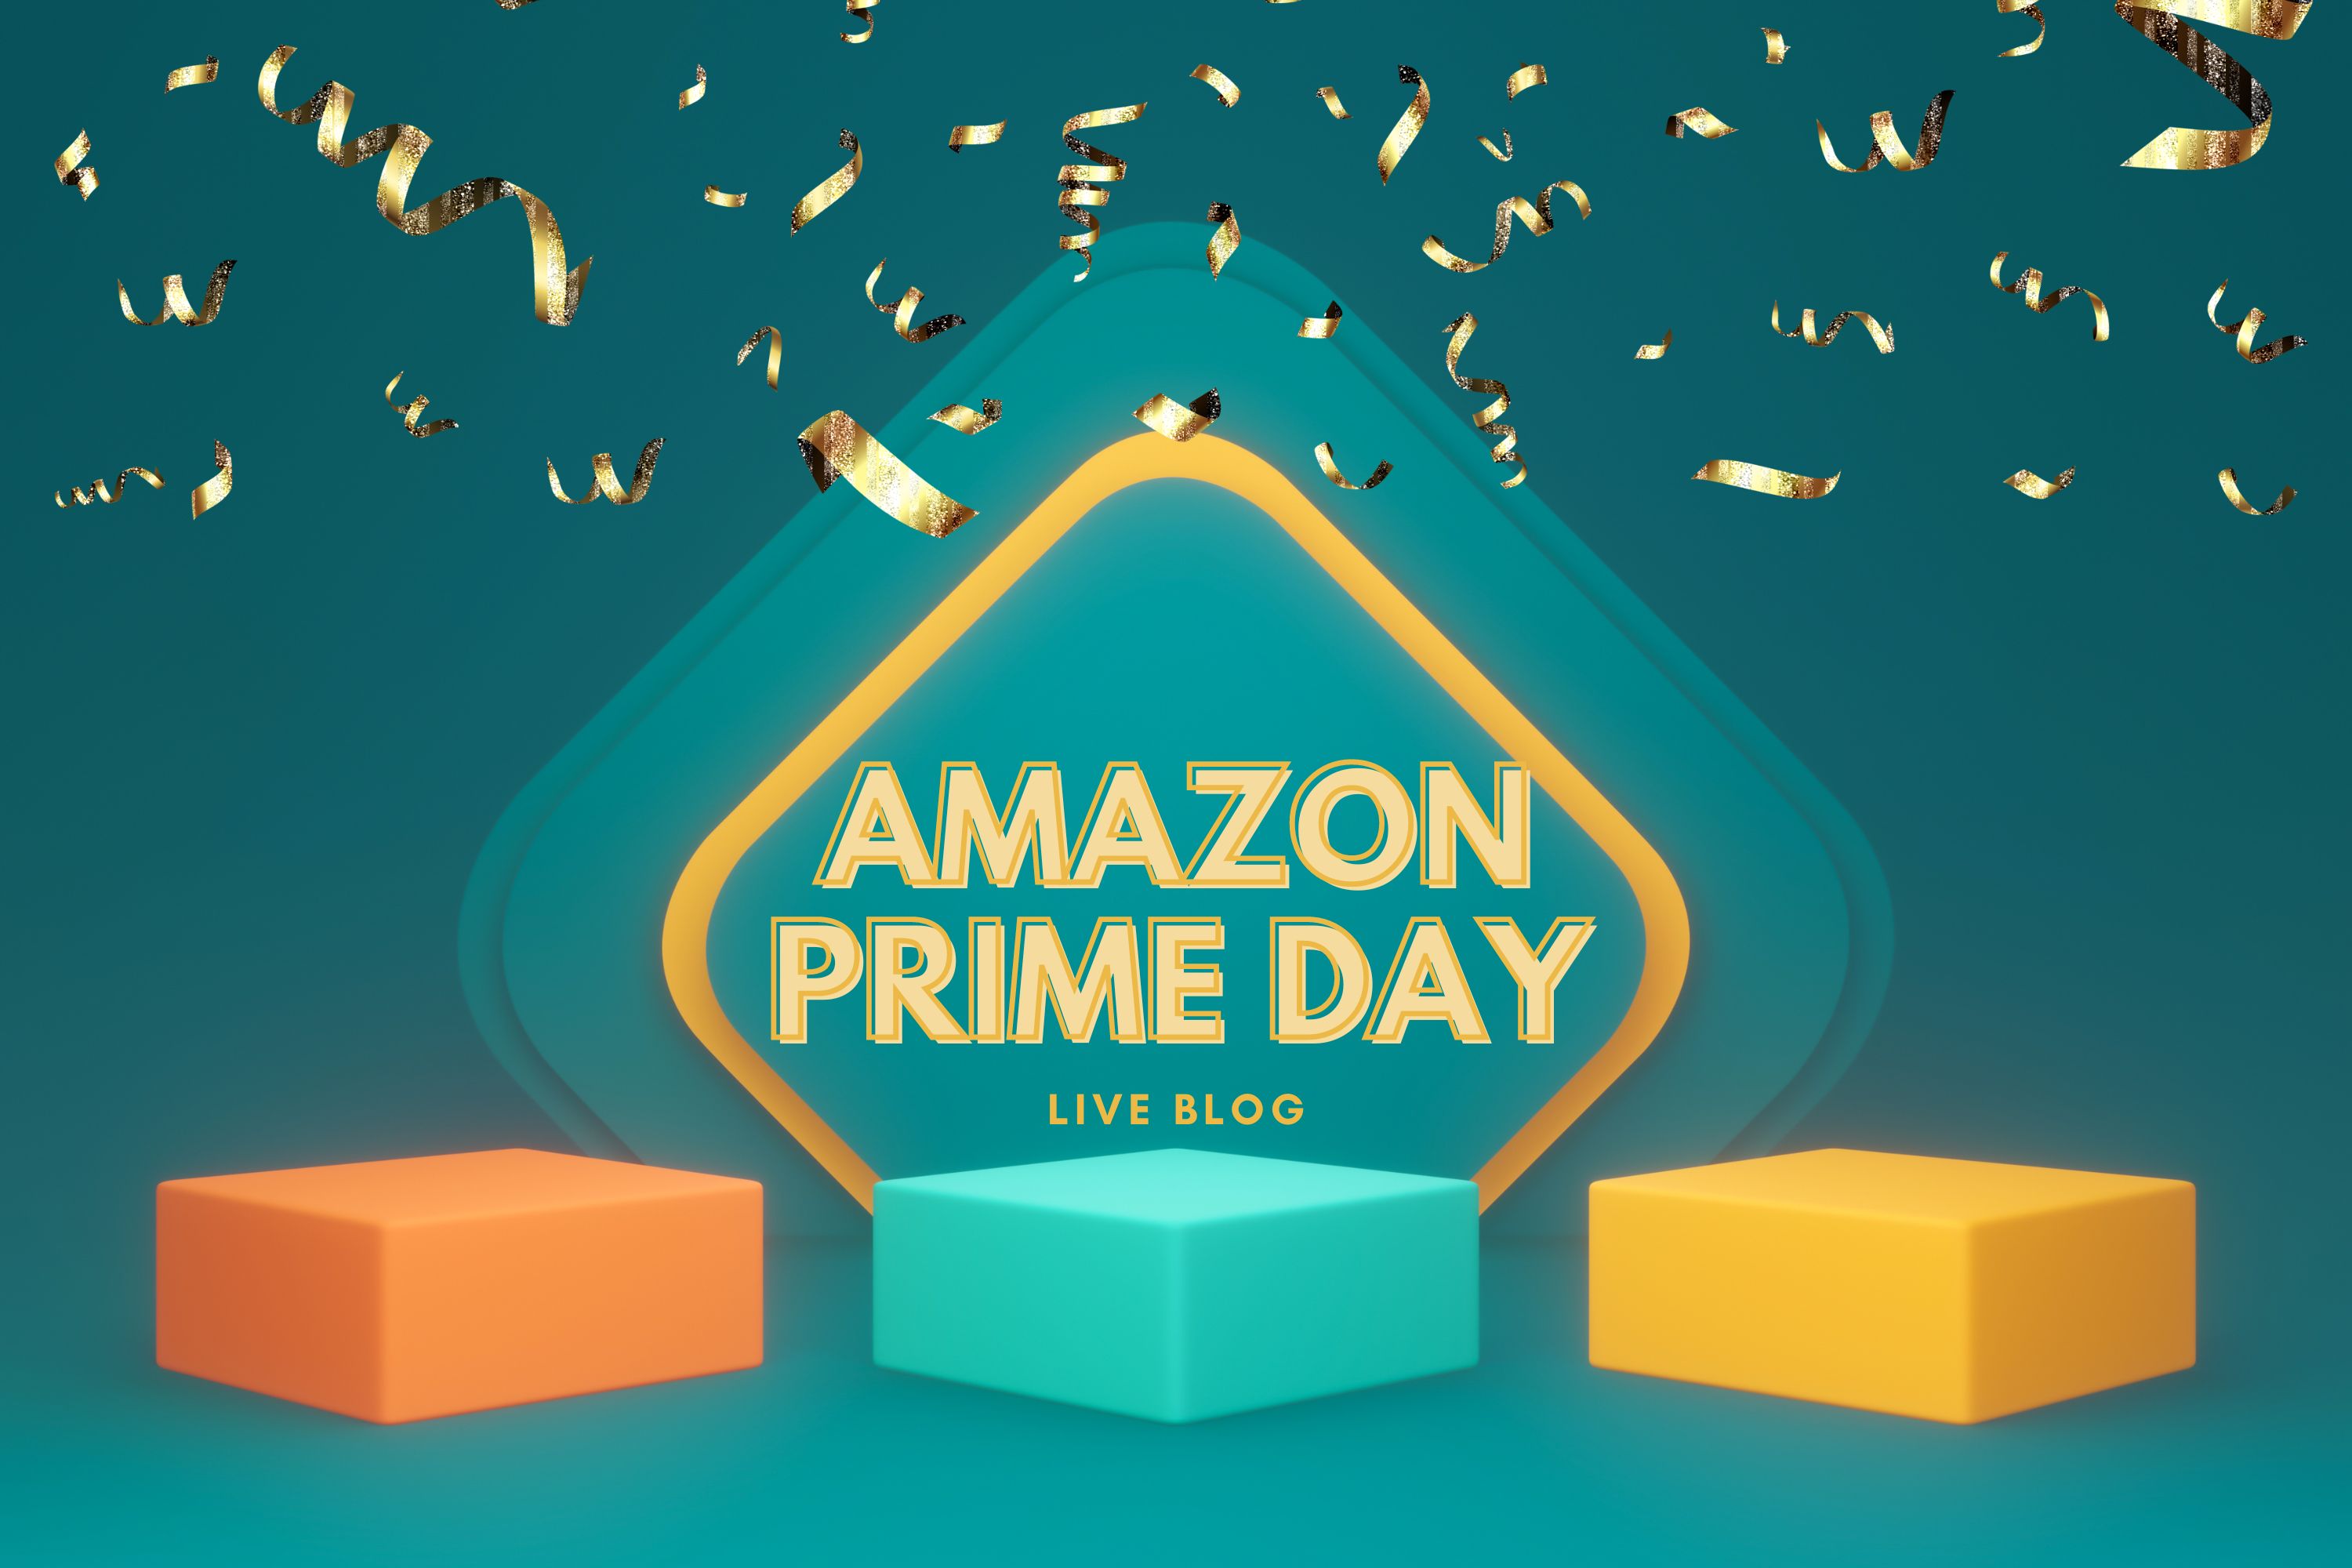 A banner image that says Amazon Prime Day Live Blog